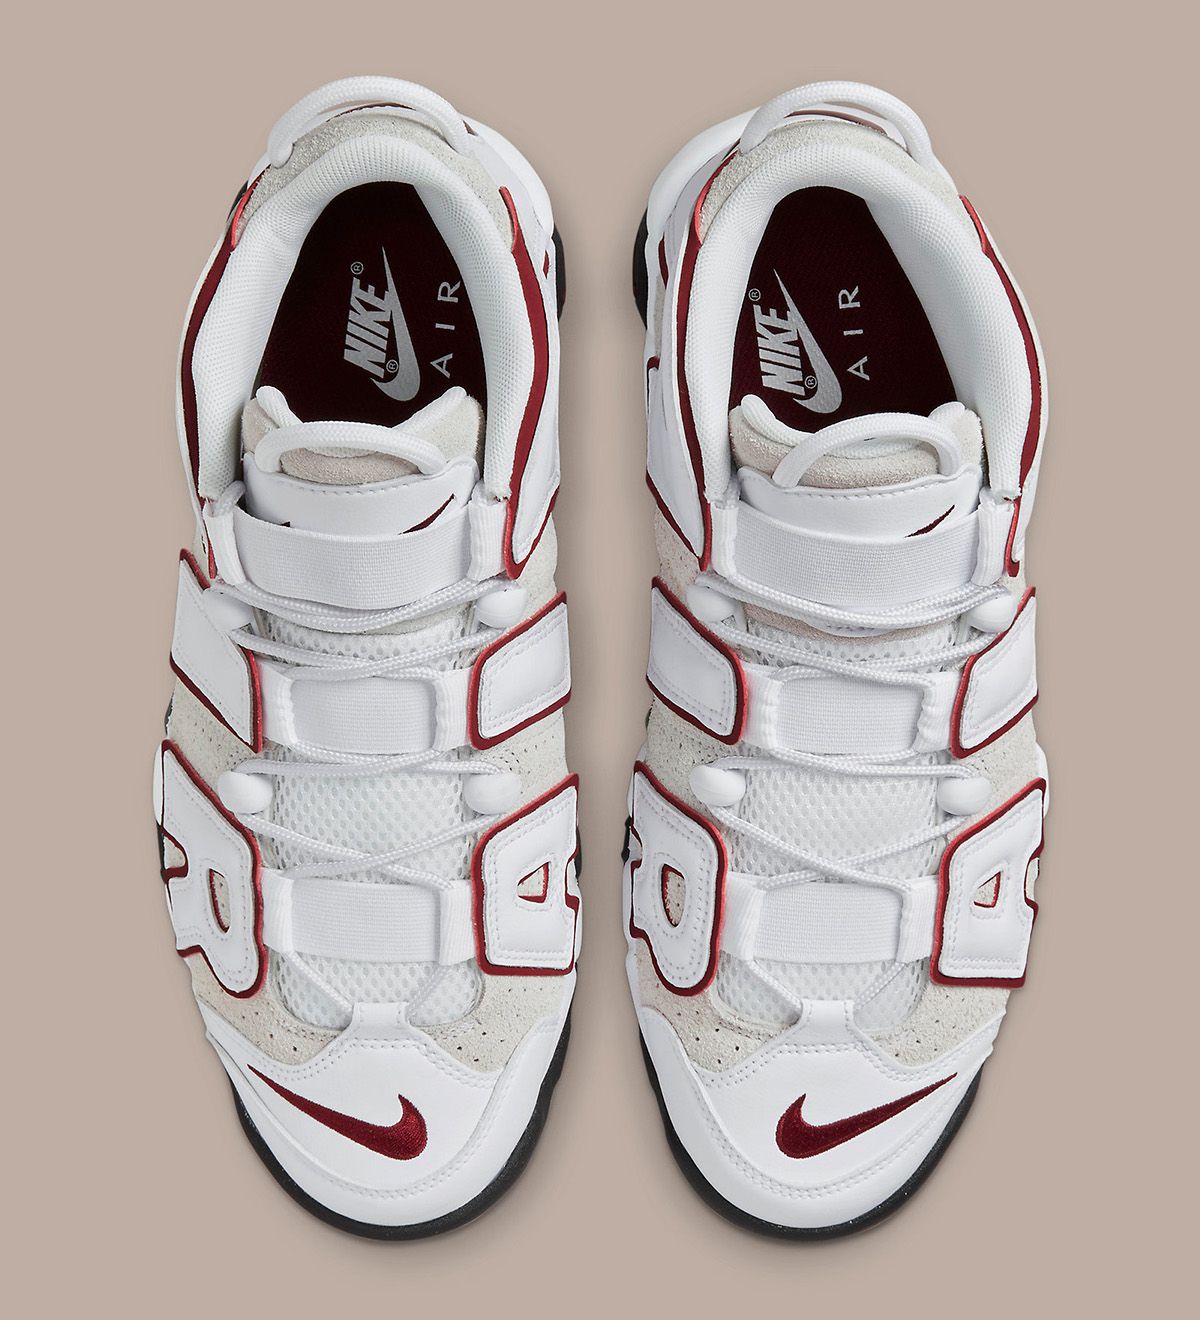 First Looks // Nike Air More Uptempo “Vintage Bulls” | House of Heat°